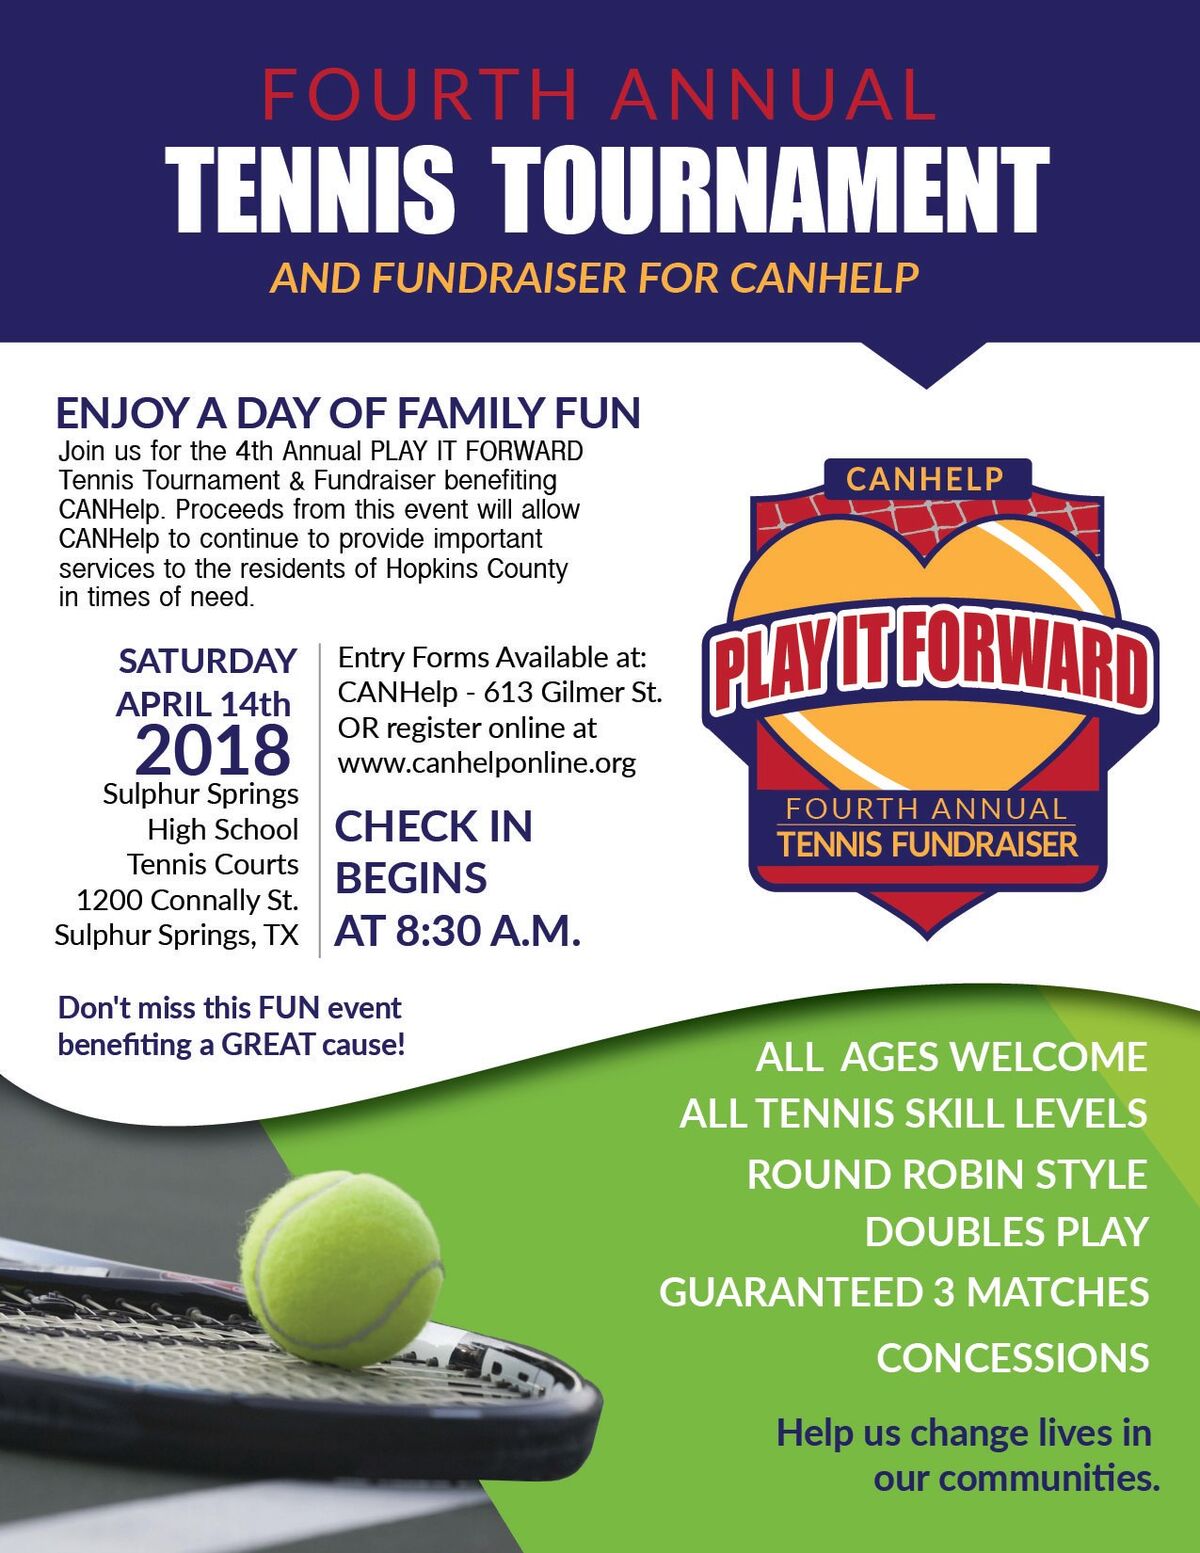 CANHelp’s 4th Annual PLAY IT FORWARD Tennis Tournament and Fundraiser on Saturday, April 14th